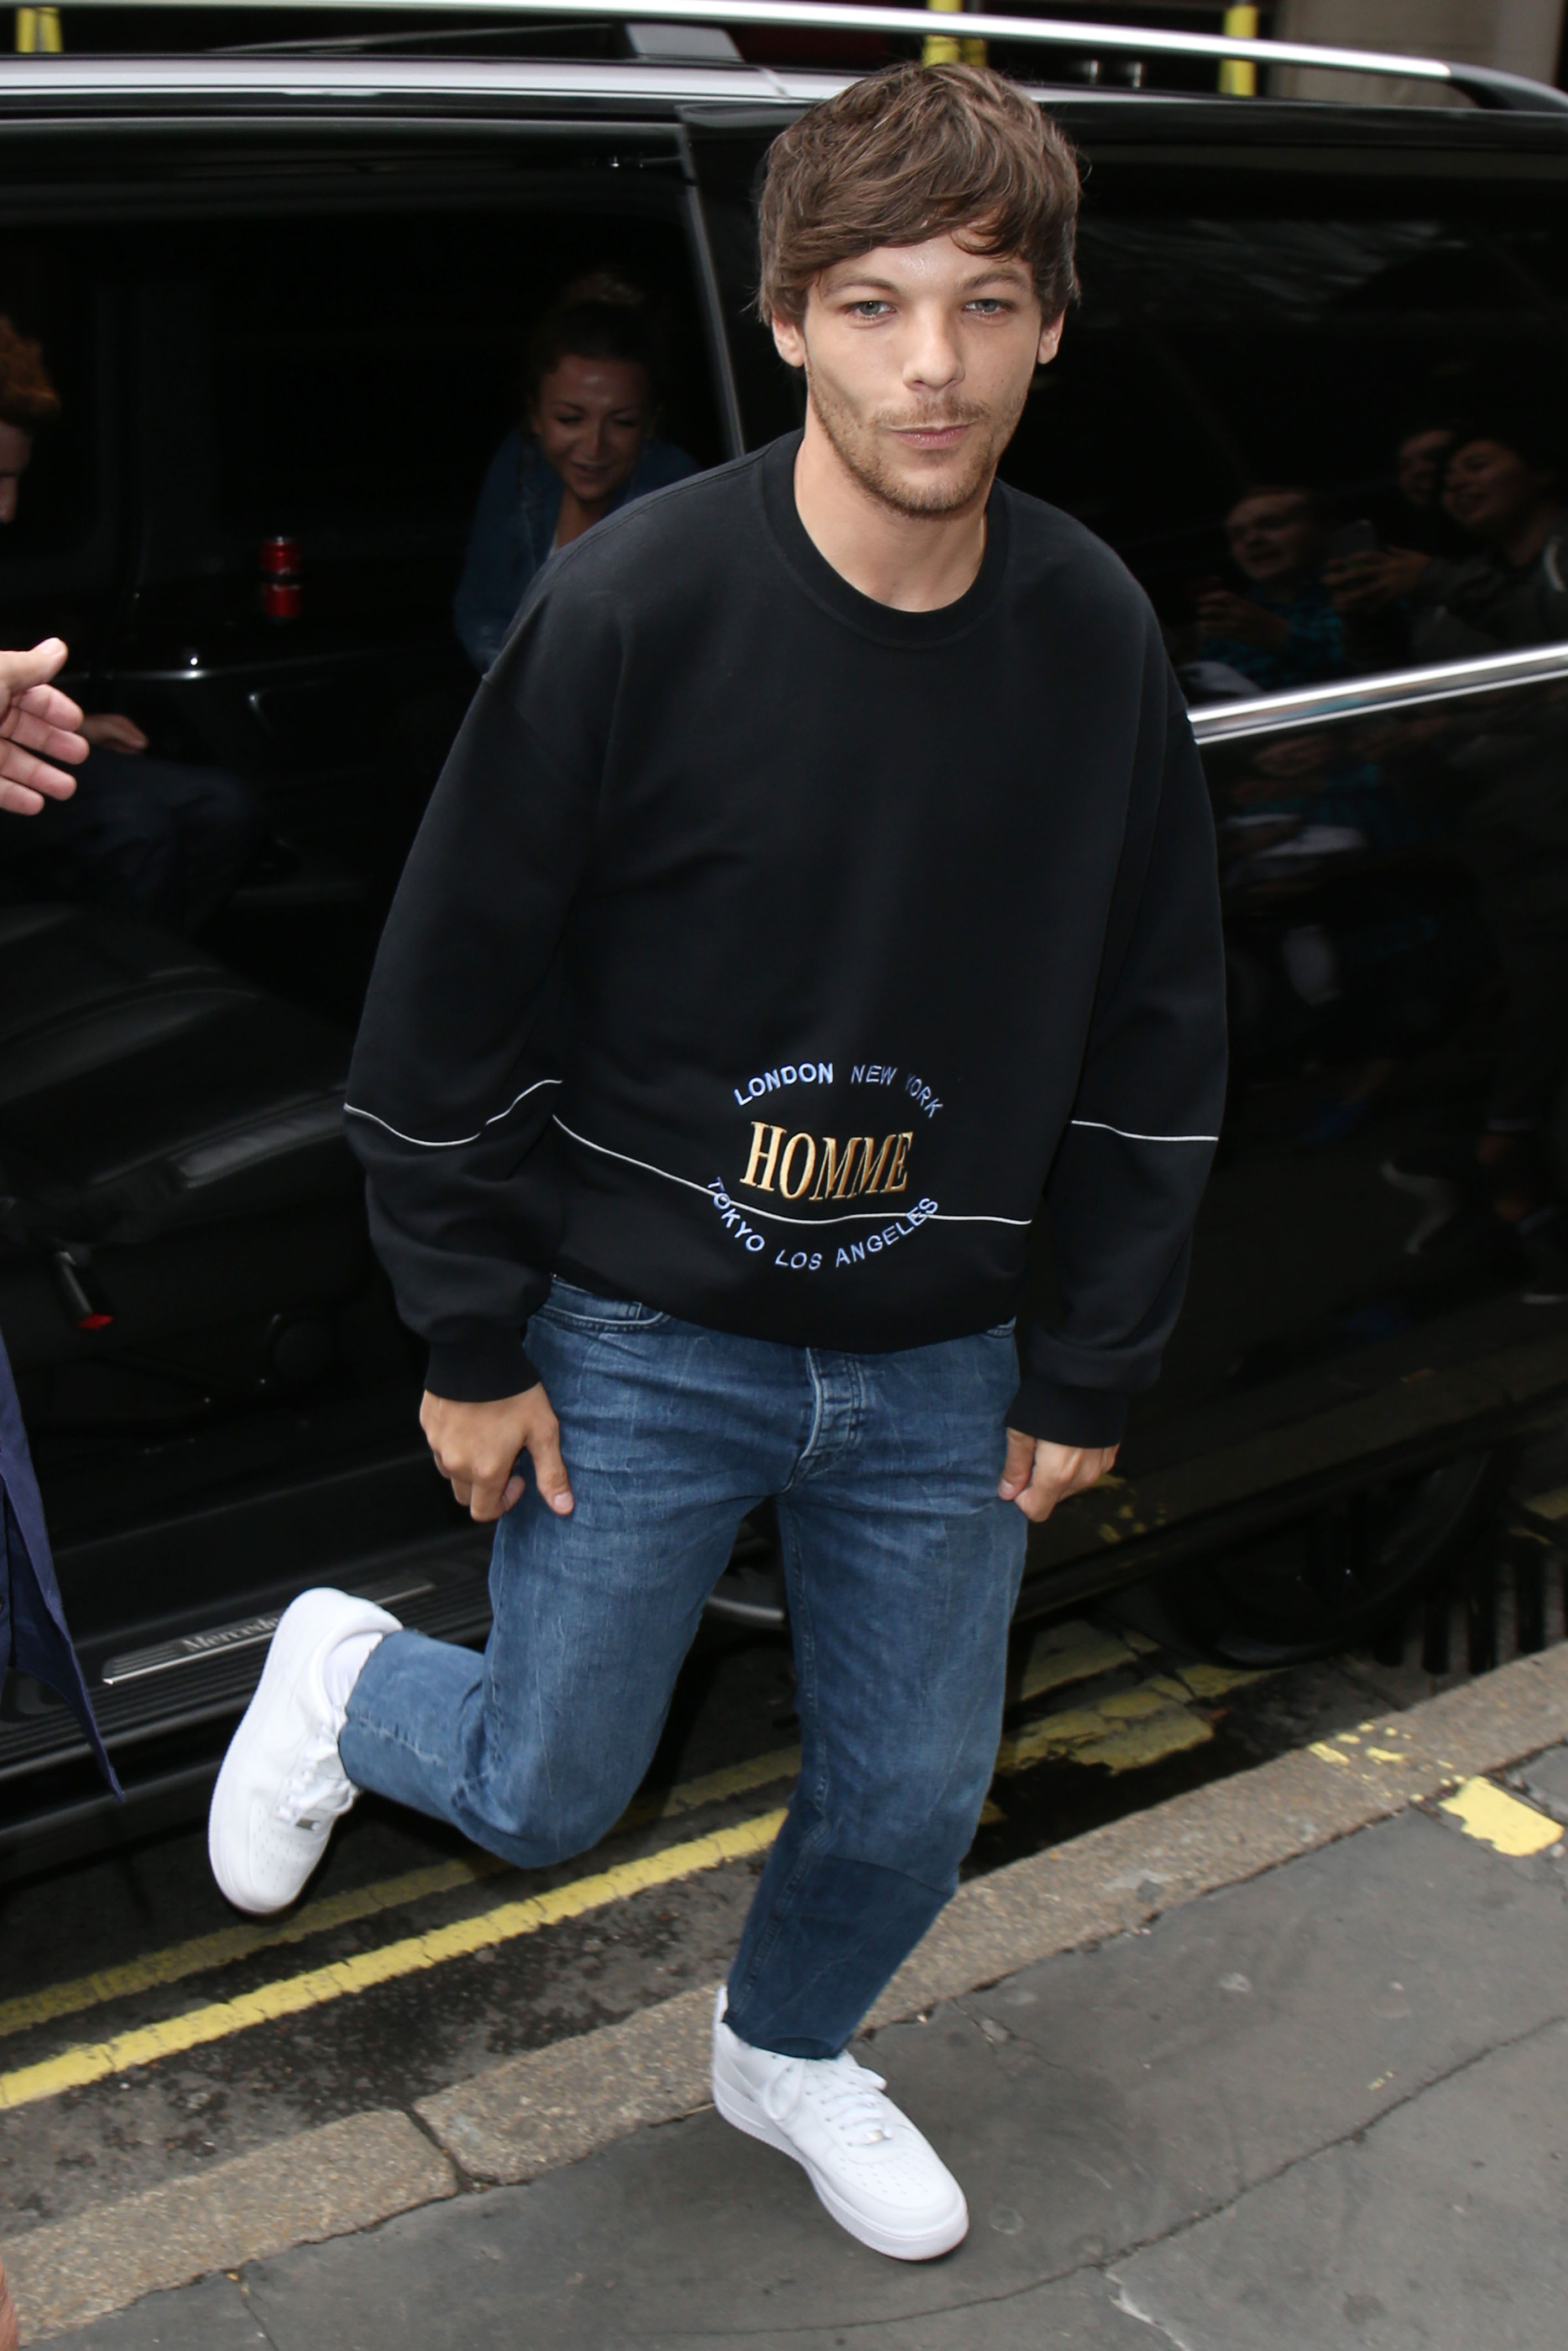 Louis Tomlinson Fashion on X: Louis appears to be wearing